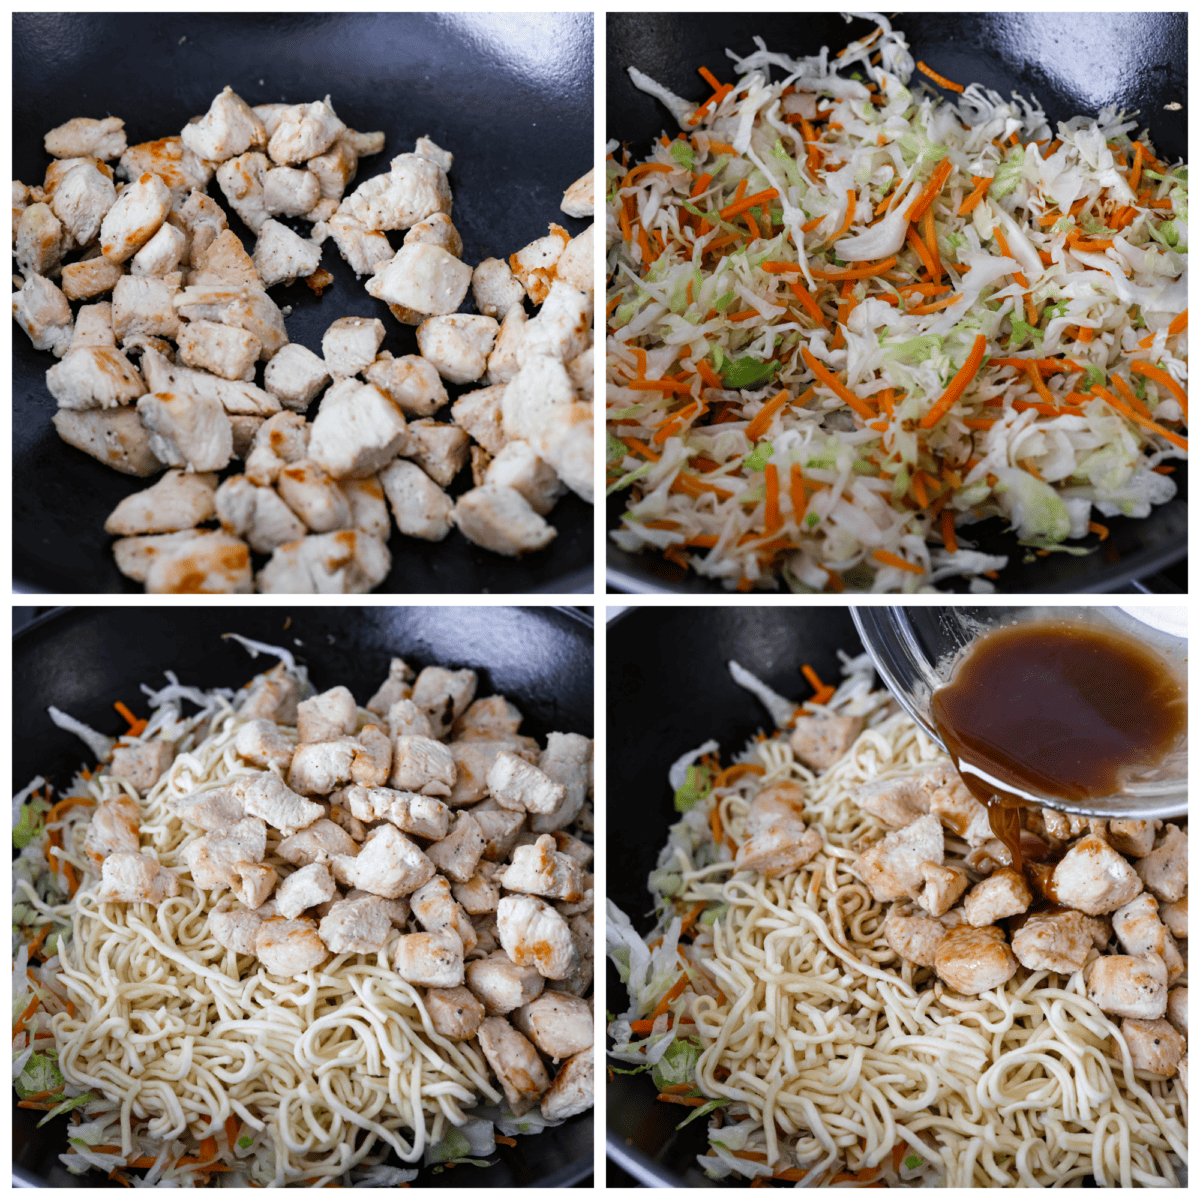 4-photo collage of all of the ingredients and sauce being mixed together and stir-fried.